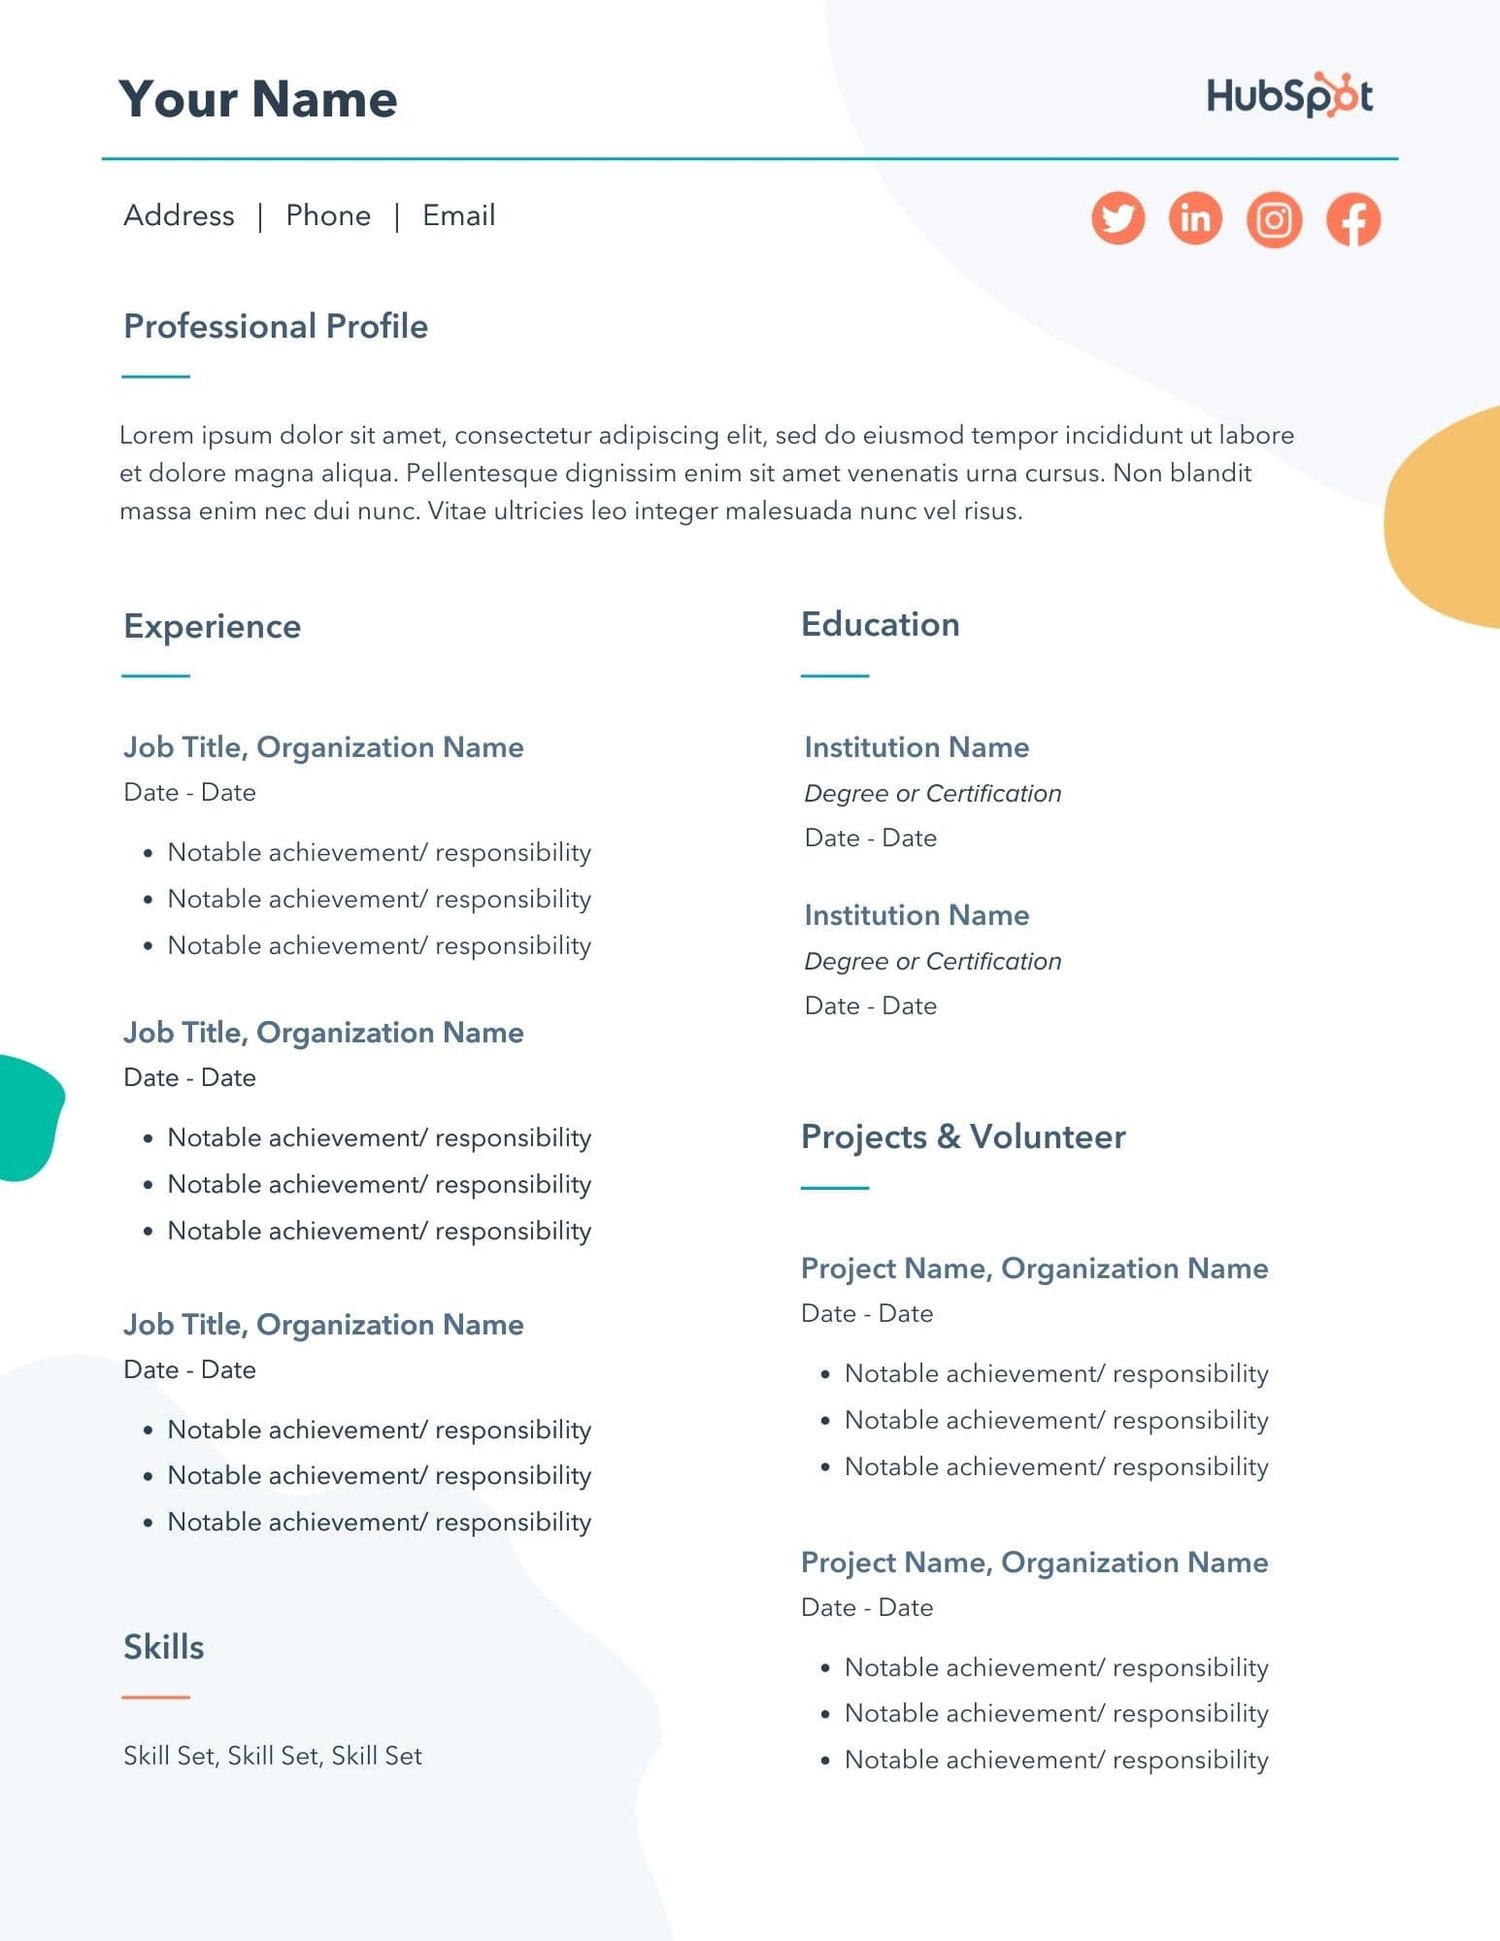 Resume Templates Free Download Word Document : Free Resume Templates Doc Resume Doc Template Visual Resume Within Cv Templates Free Download Word Document Cv Kreatif Desain Cv Kreatif / Beautiful layouts, pick your favorite.